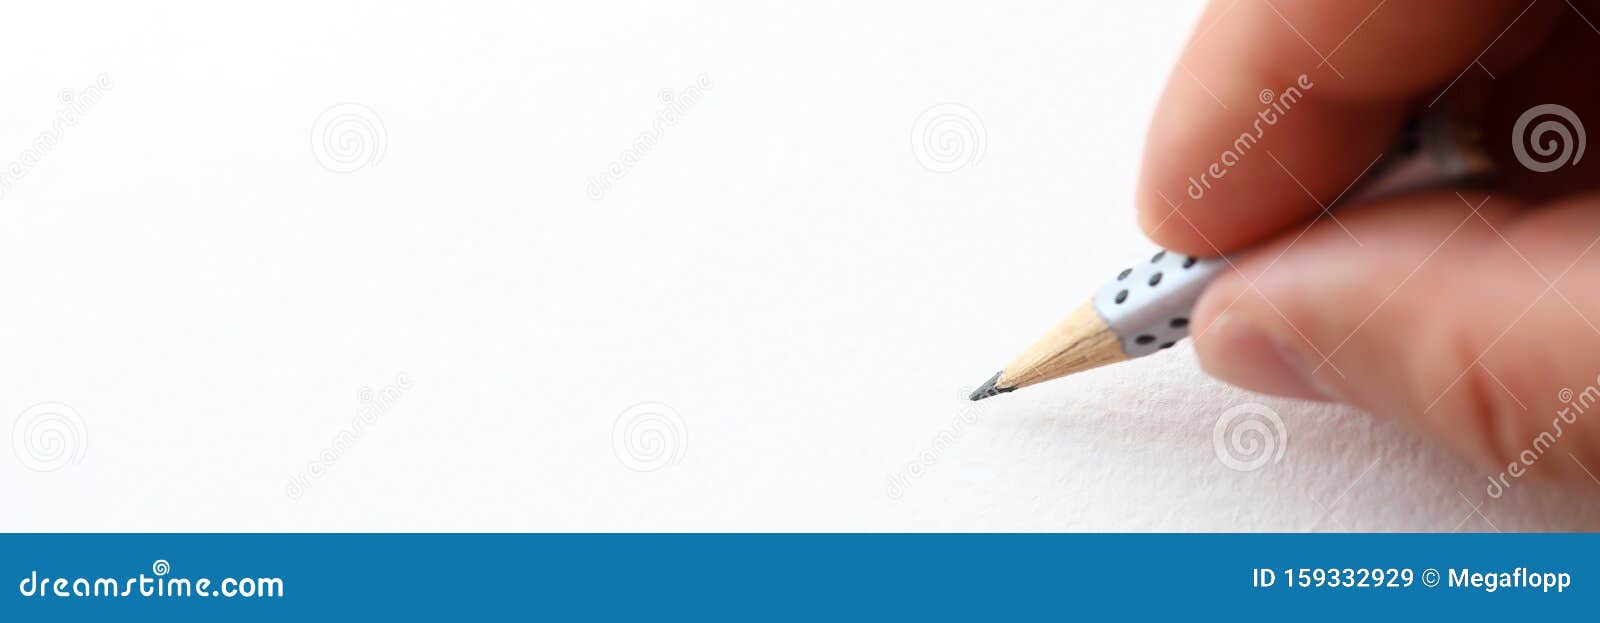 Male Hand Holding Simple Pencil Stump Stock Image - Image of ...